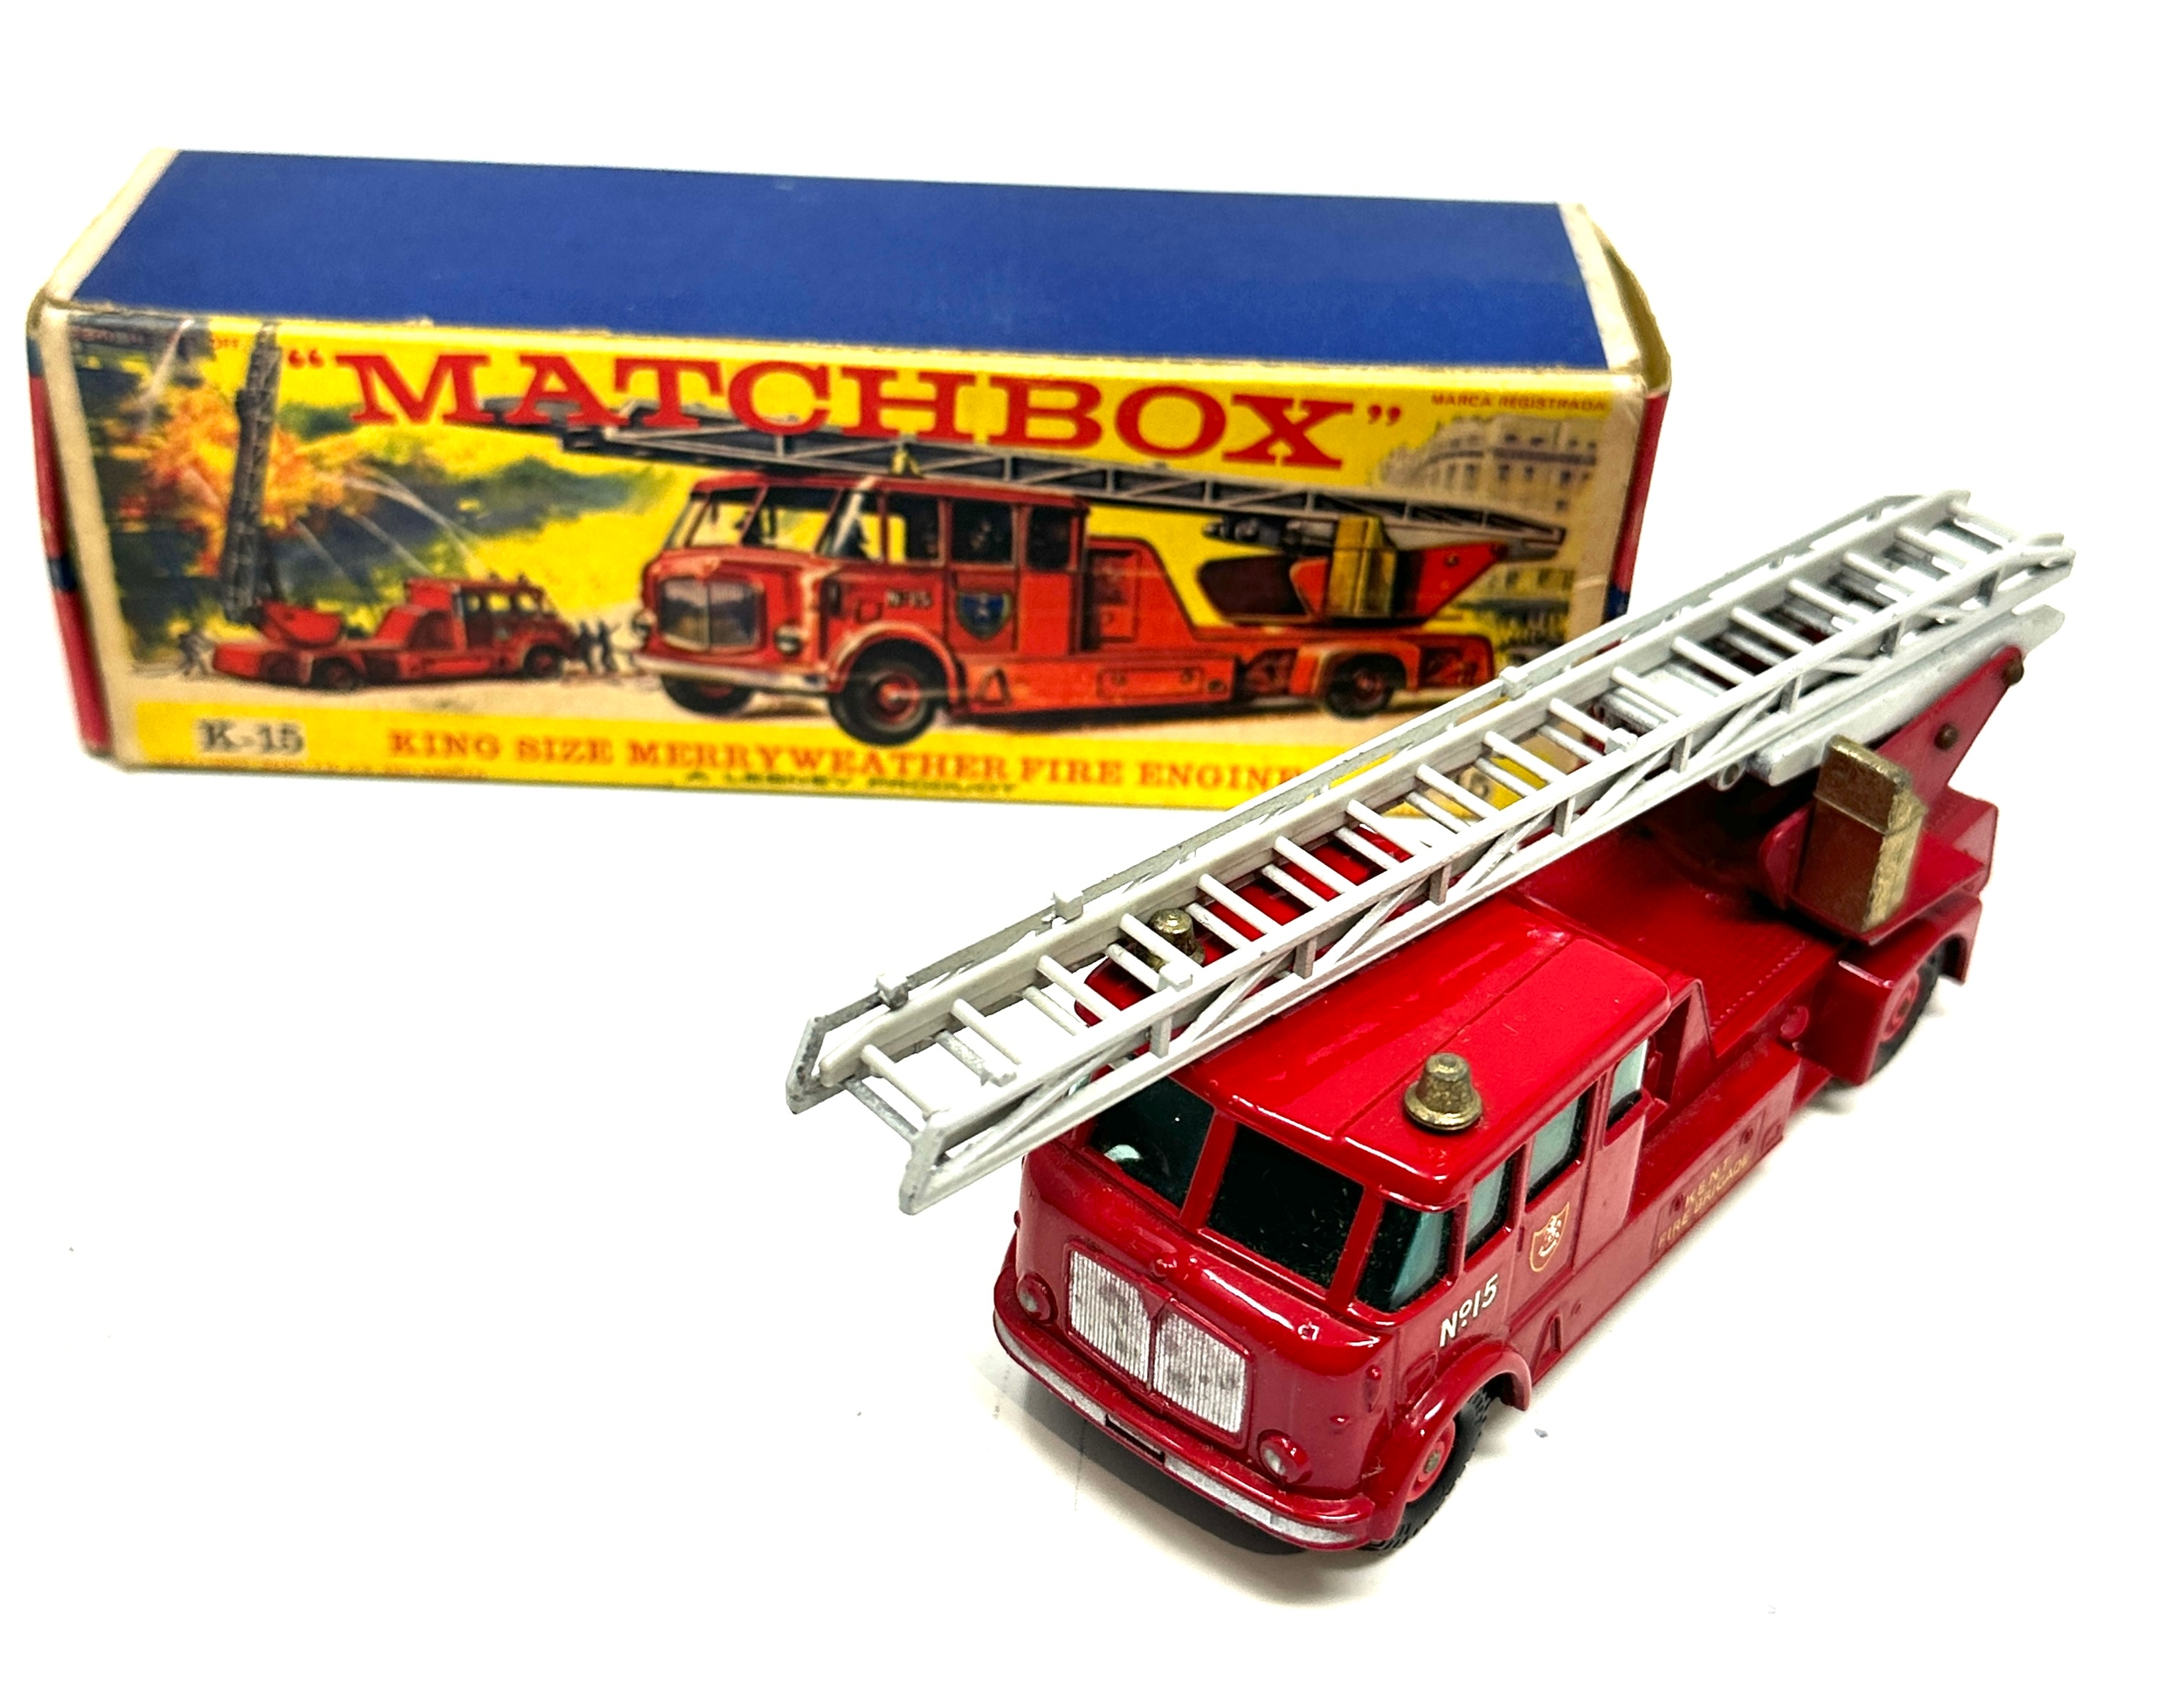 Lesney Matchbox King Size K-15 Merryweather Fire Engine Darker Red with Box - Image 2 of 3